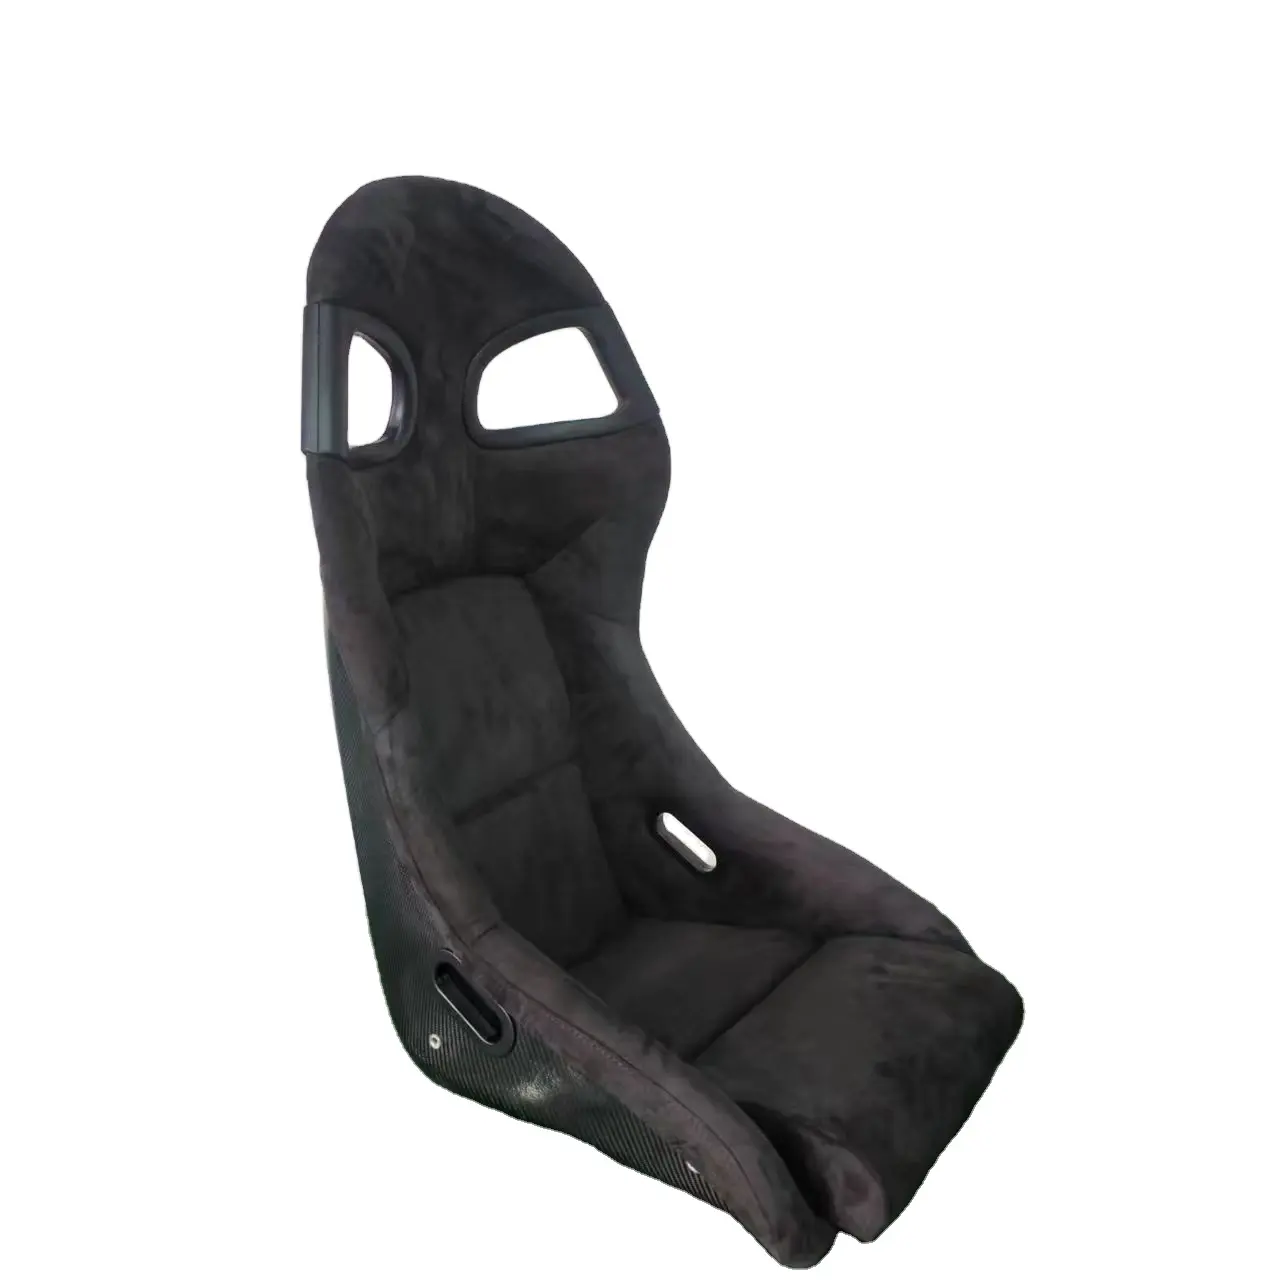 Carbon fiber style car racing seats for luxury super fast cars 1029 high quality